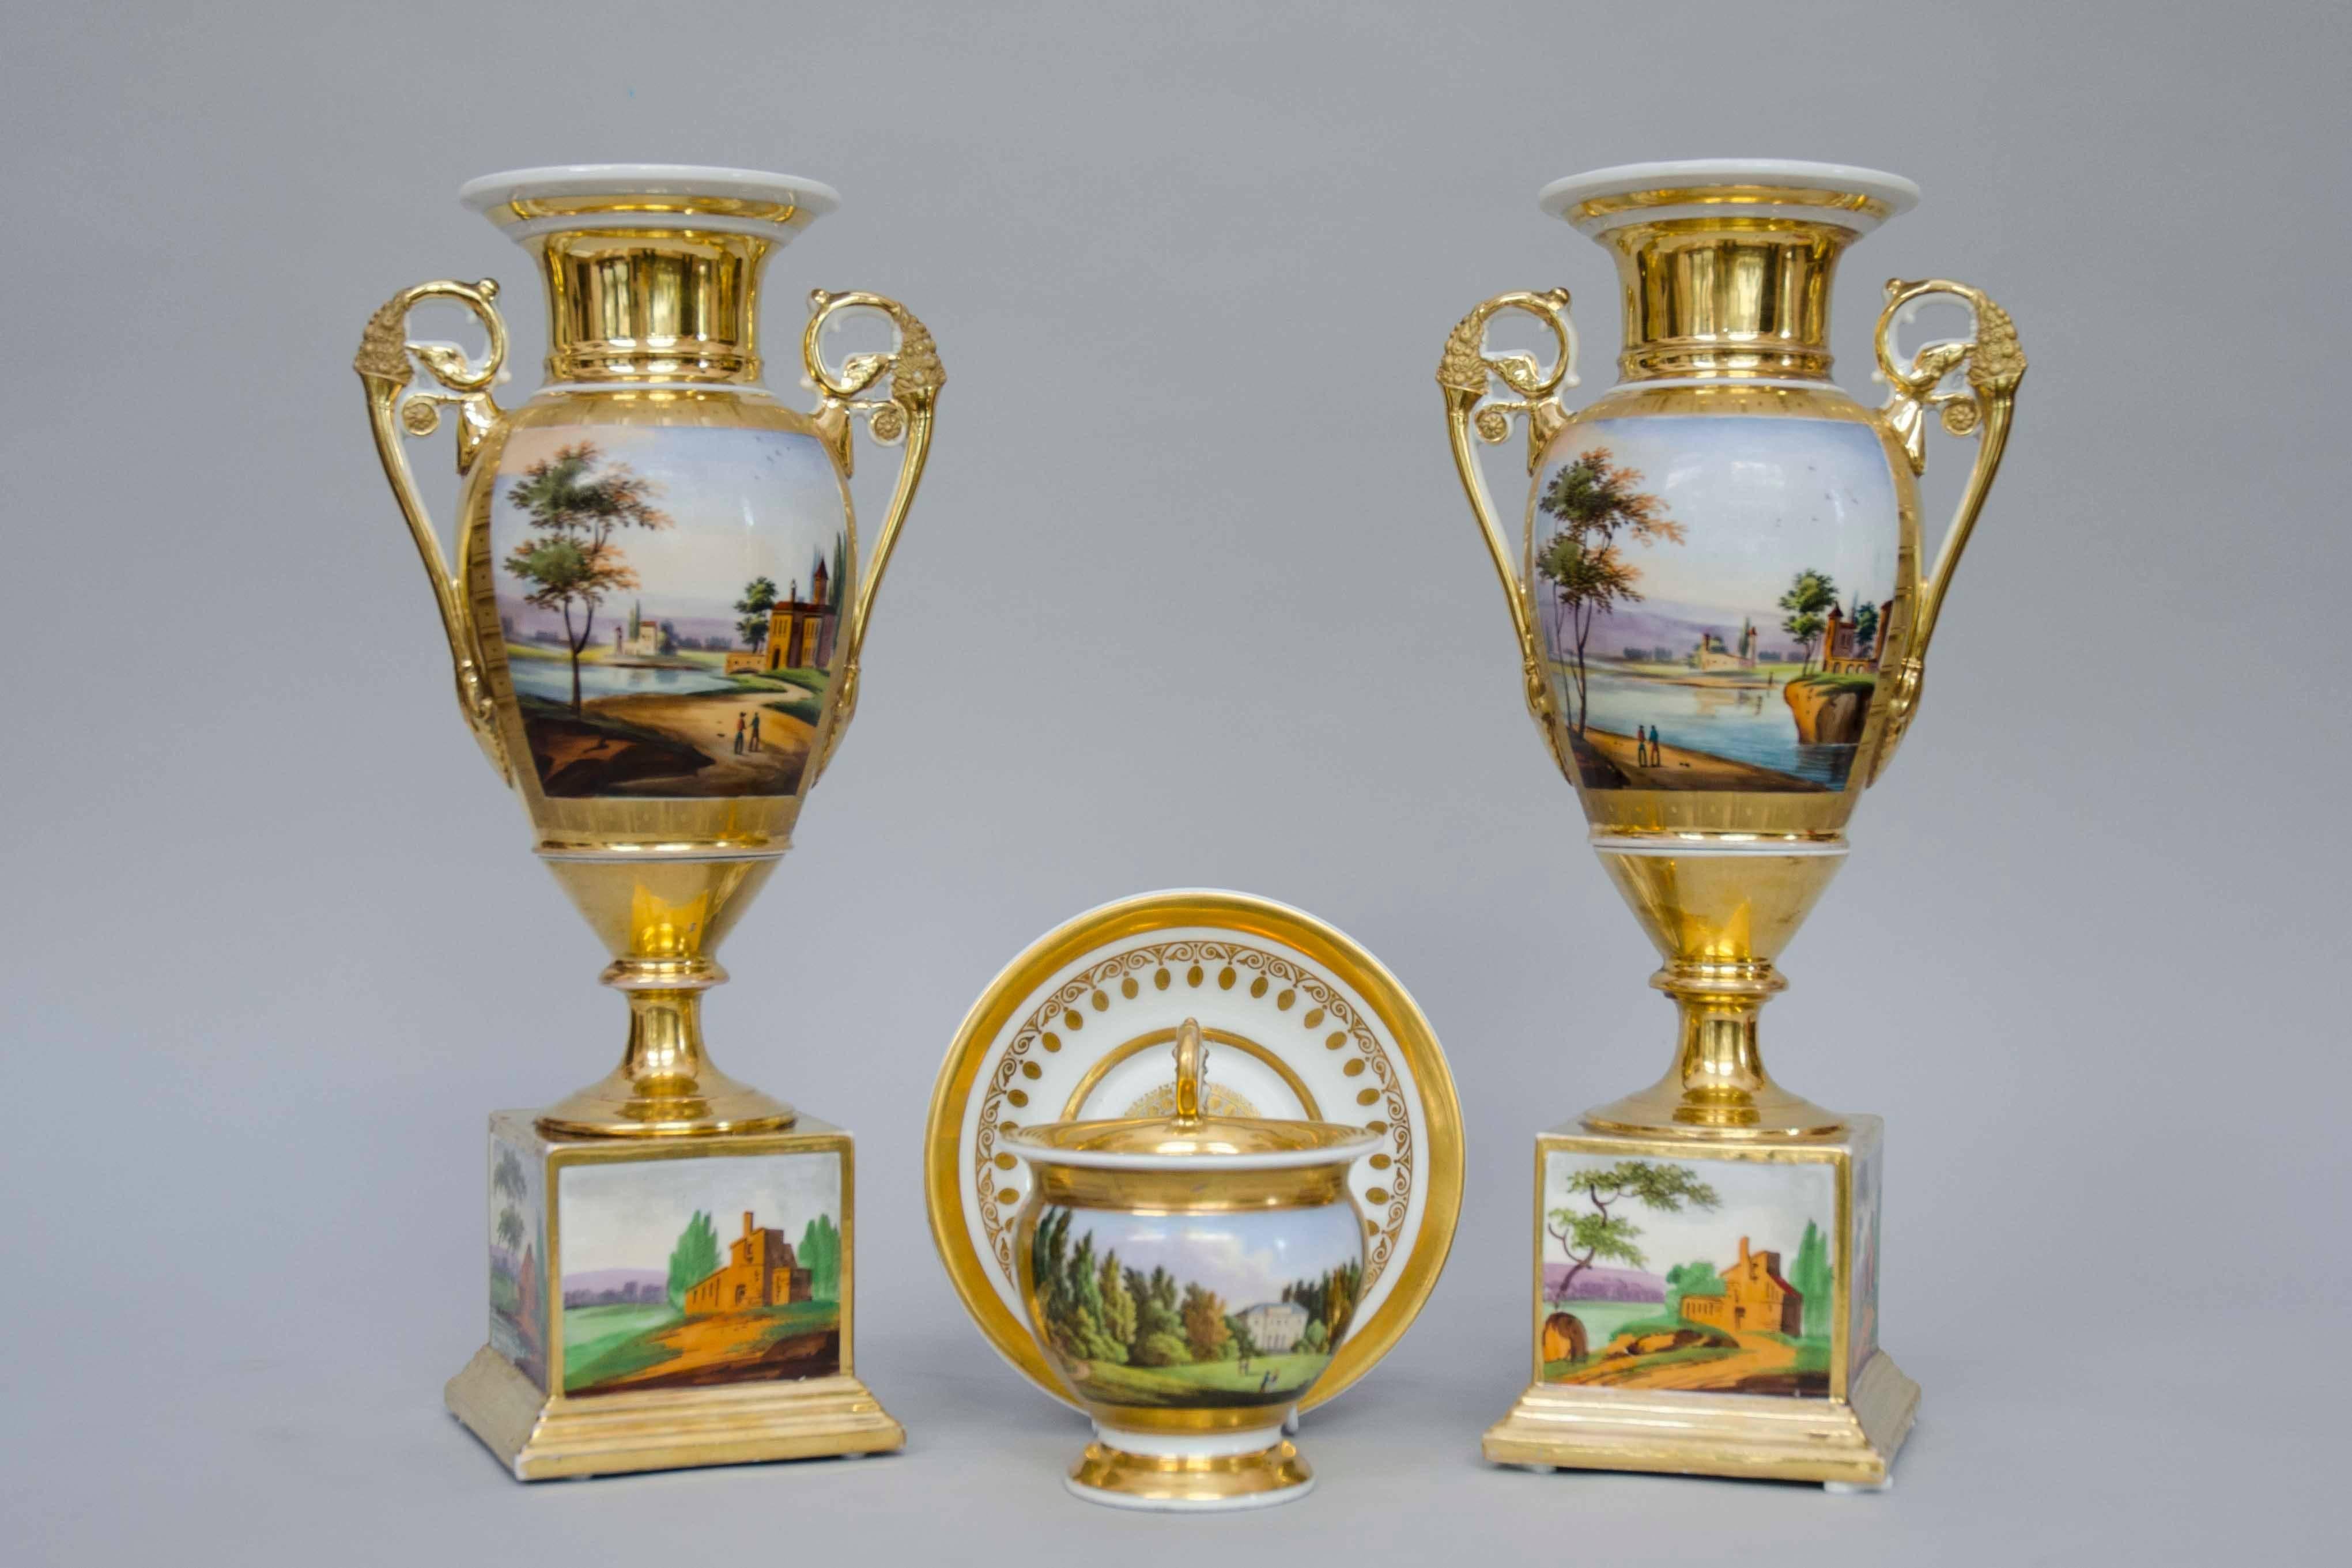 19th Century Squared Based Egg Shaped Vases with Italian Landscapes, Brussels For Sale 3